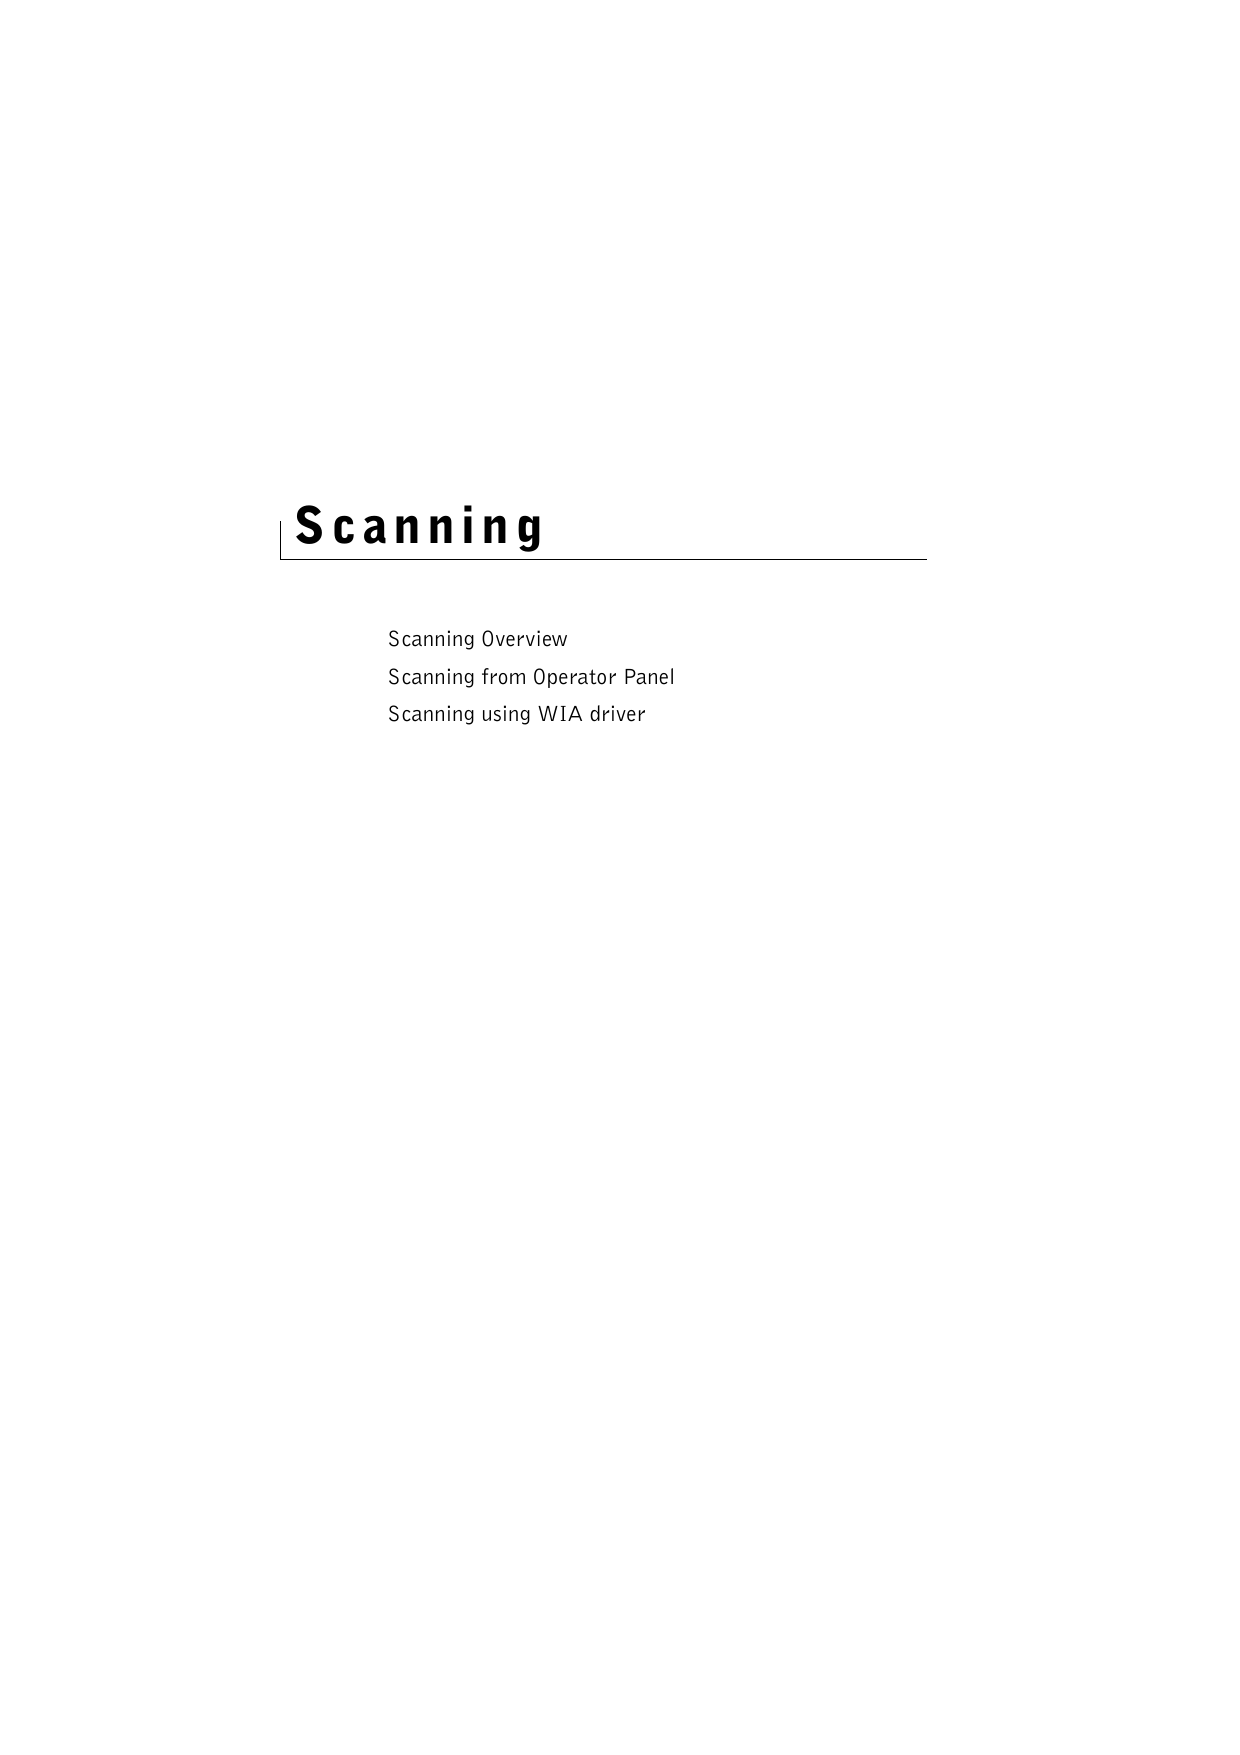 ScanningScanning OverviewScanning from Operator PanelScanning using WIA driver